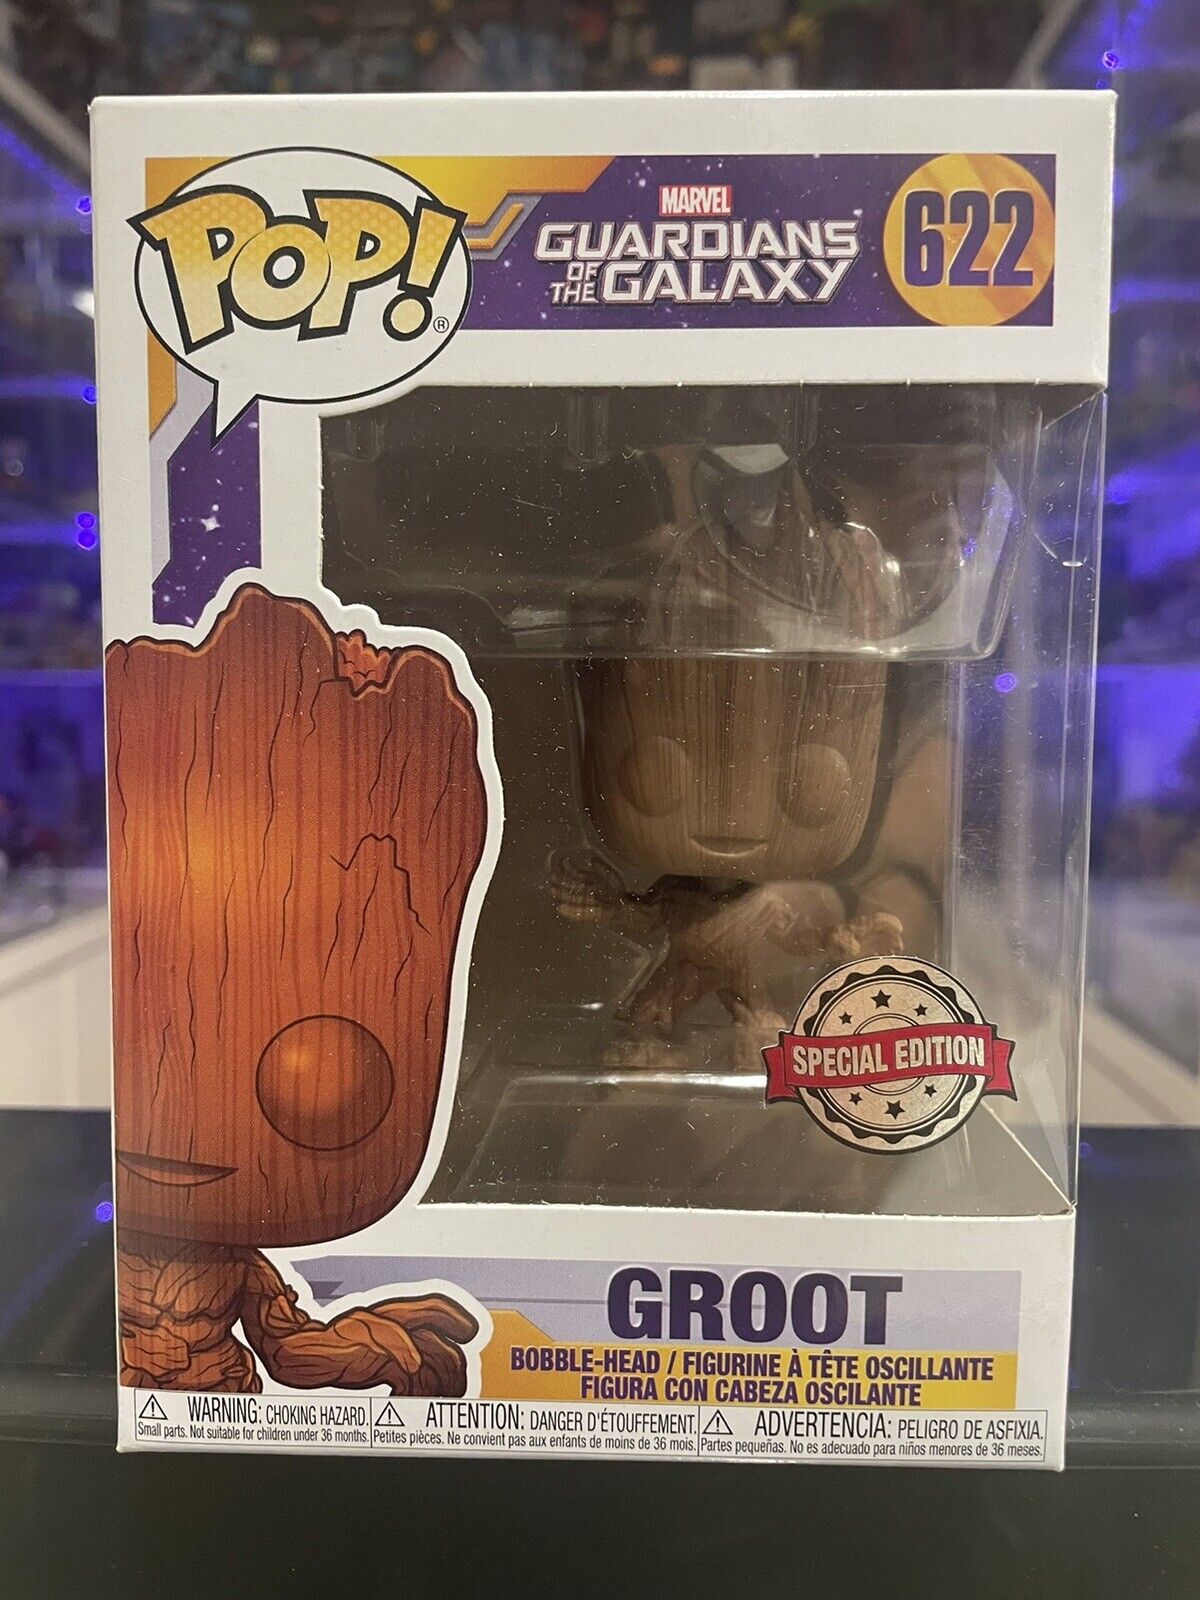 Funko-Pop-Guardians-of-the-Galaxy-622-Groot-Special-Edition-144844572309